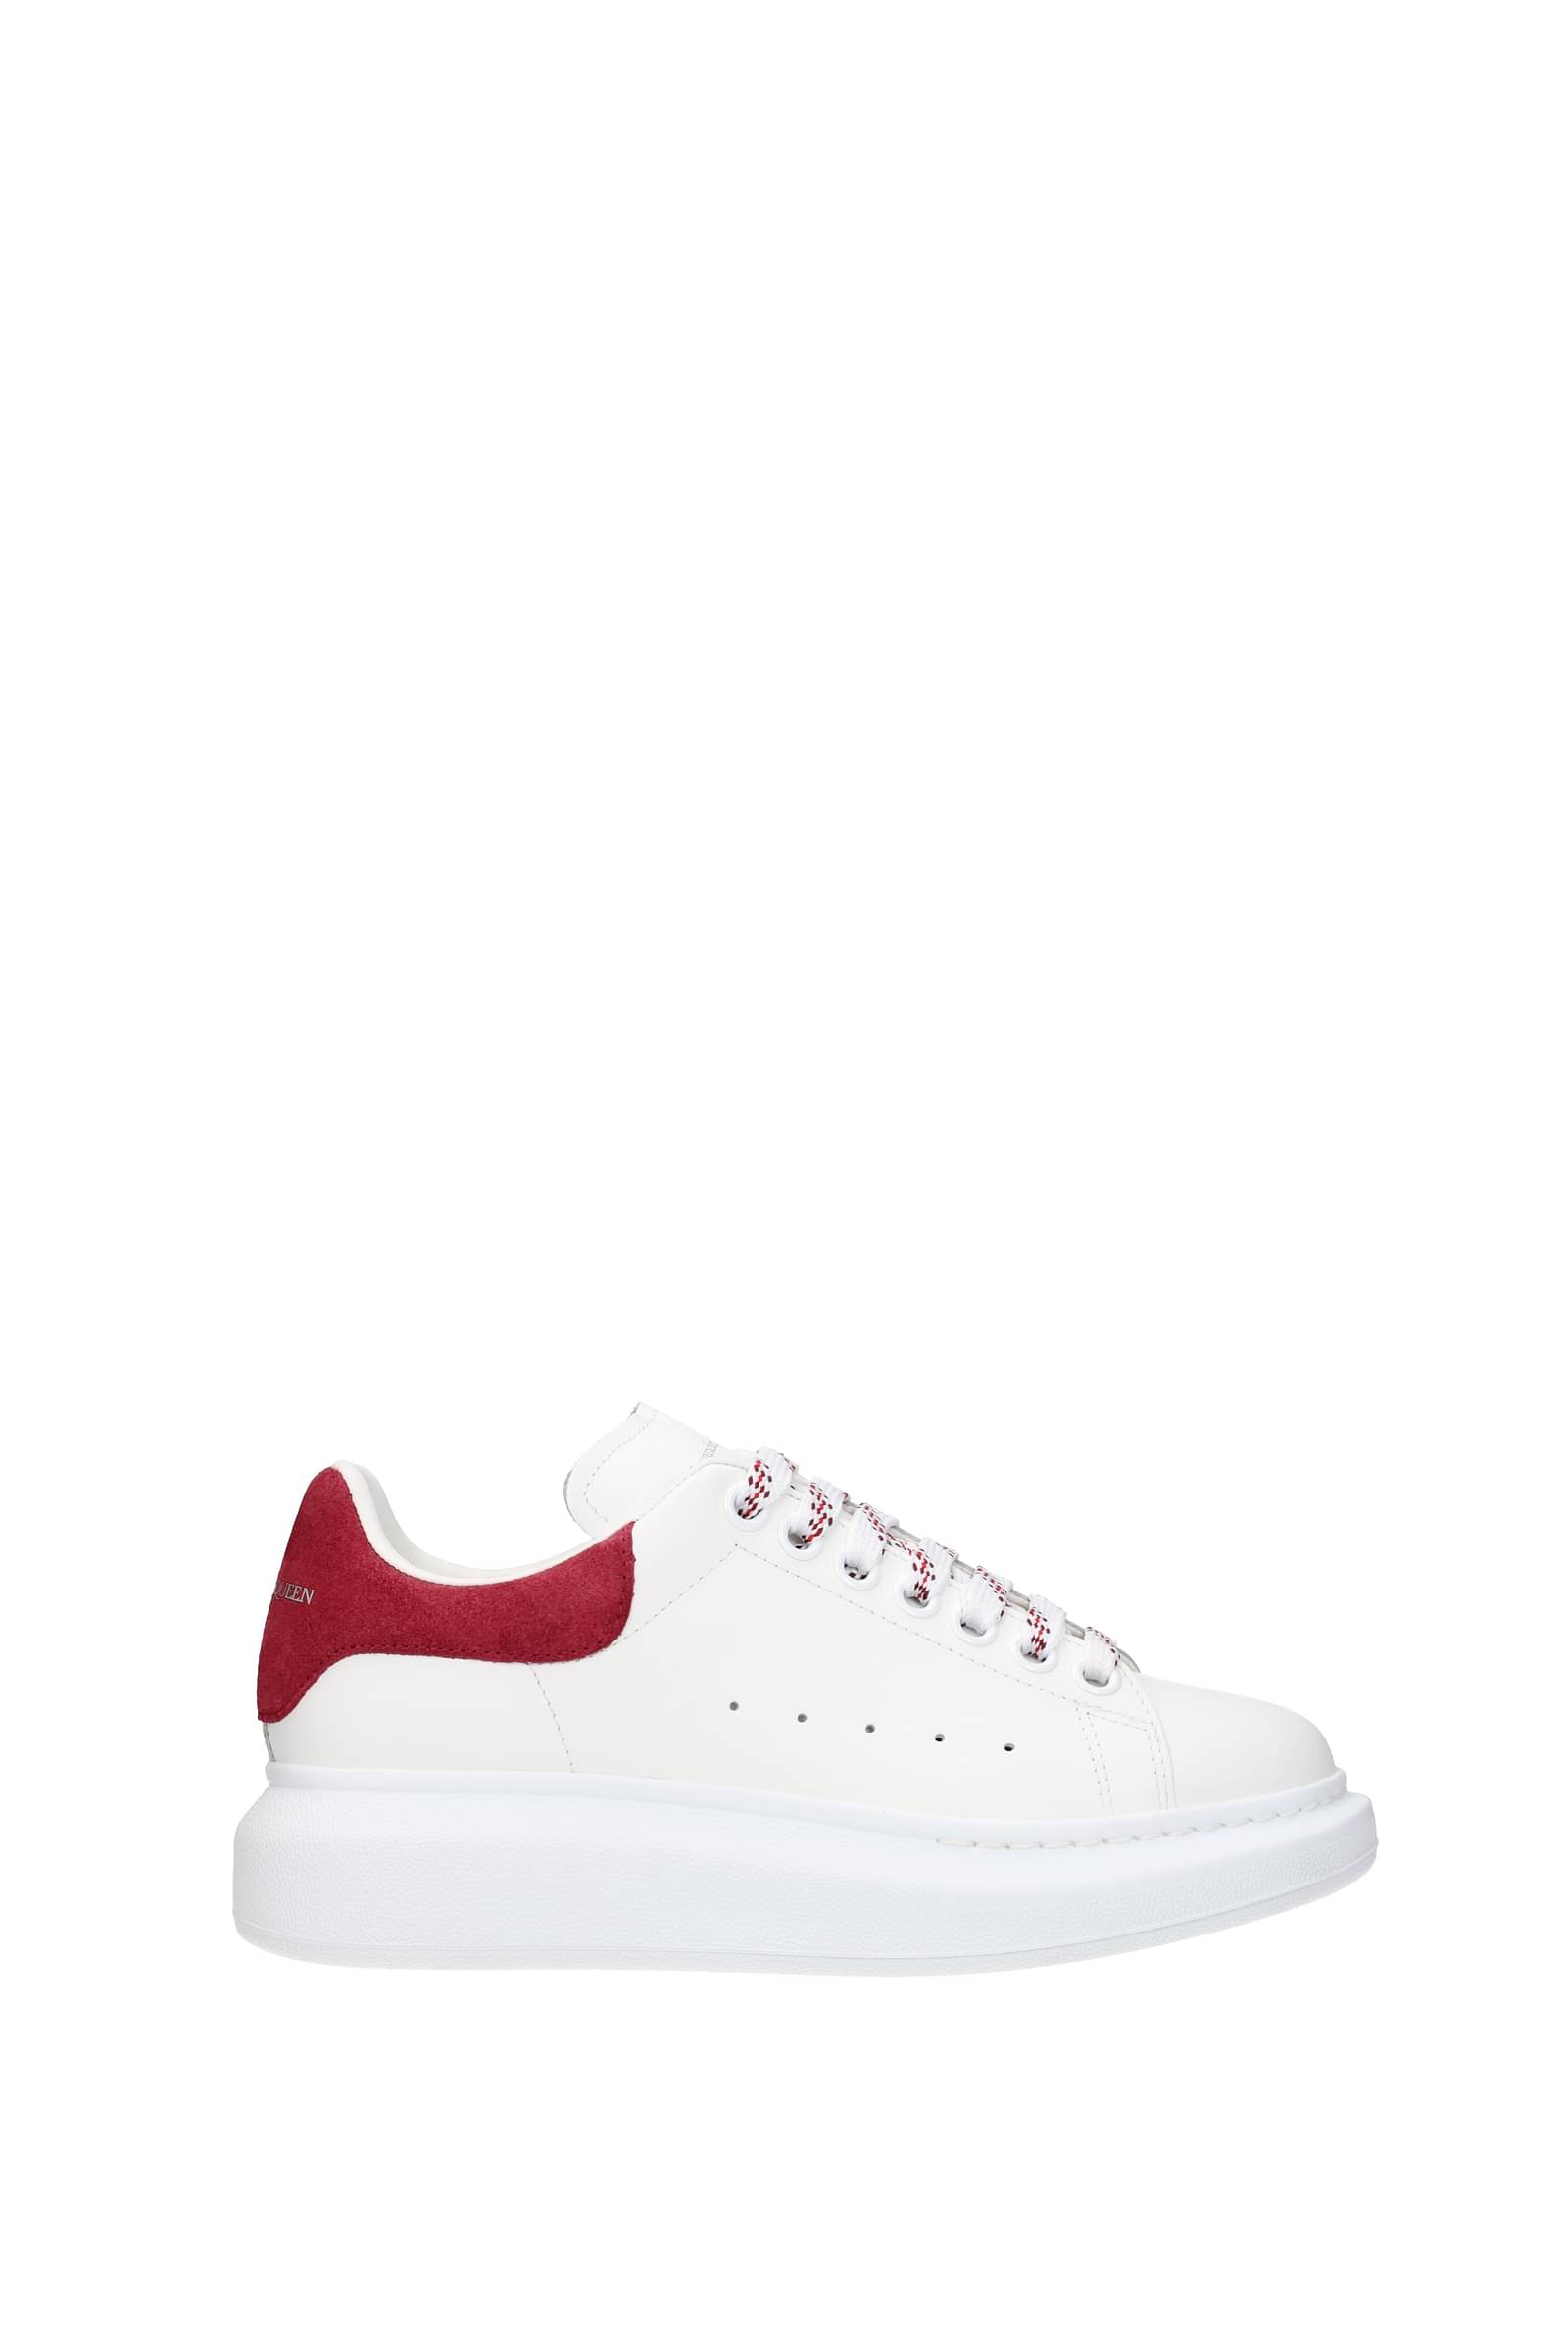 Alexander McQueen Sneakers Oversized Leather White Mustard | Lyst